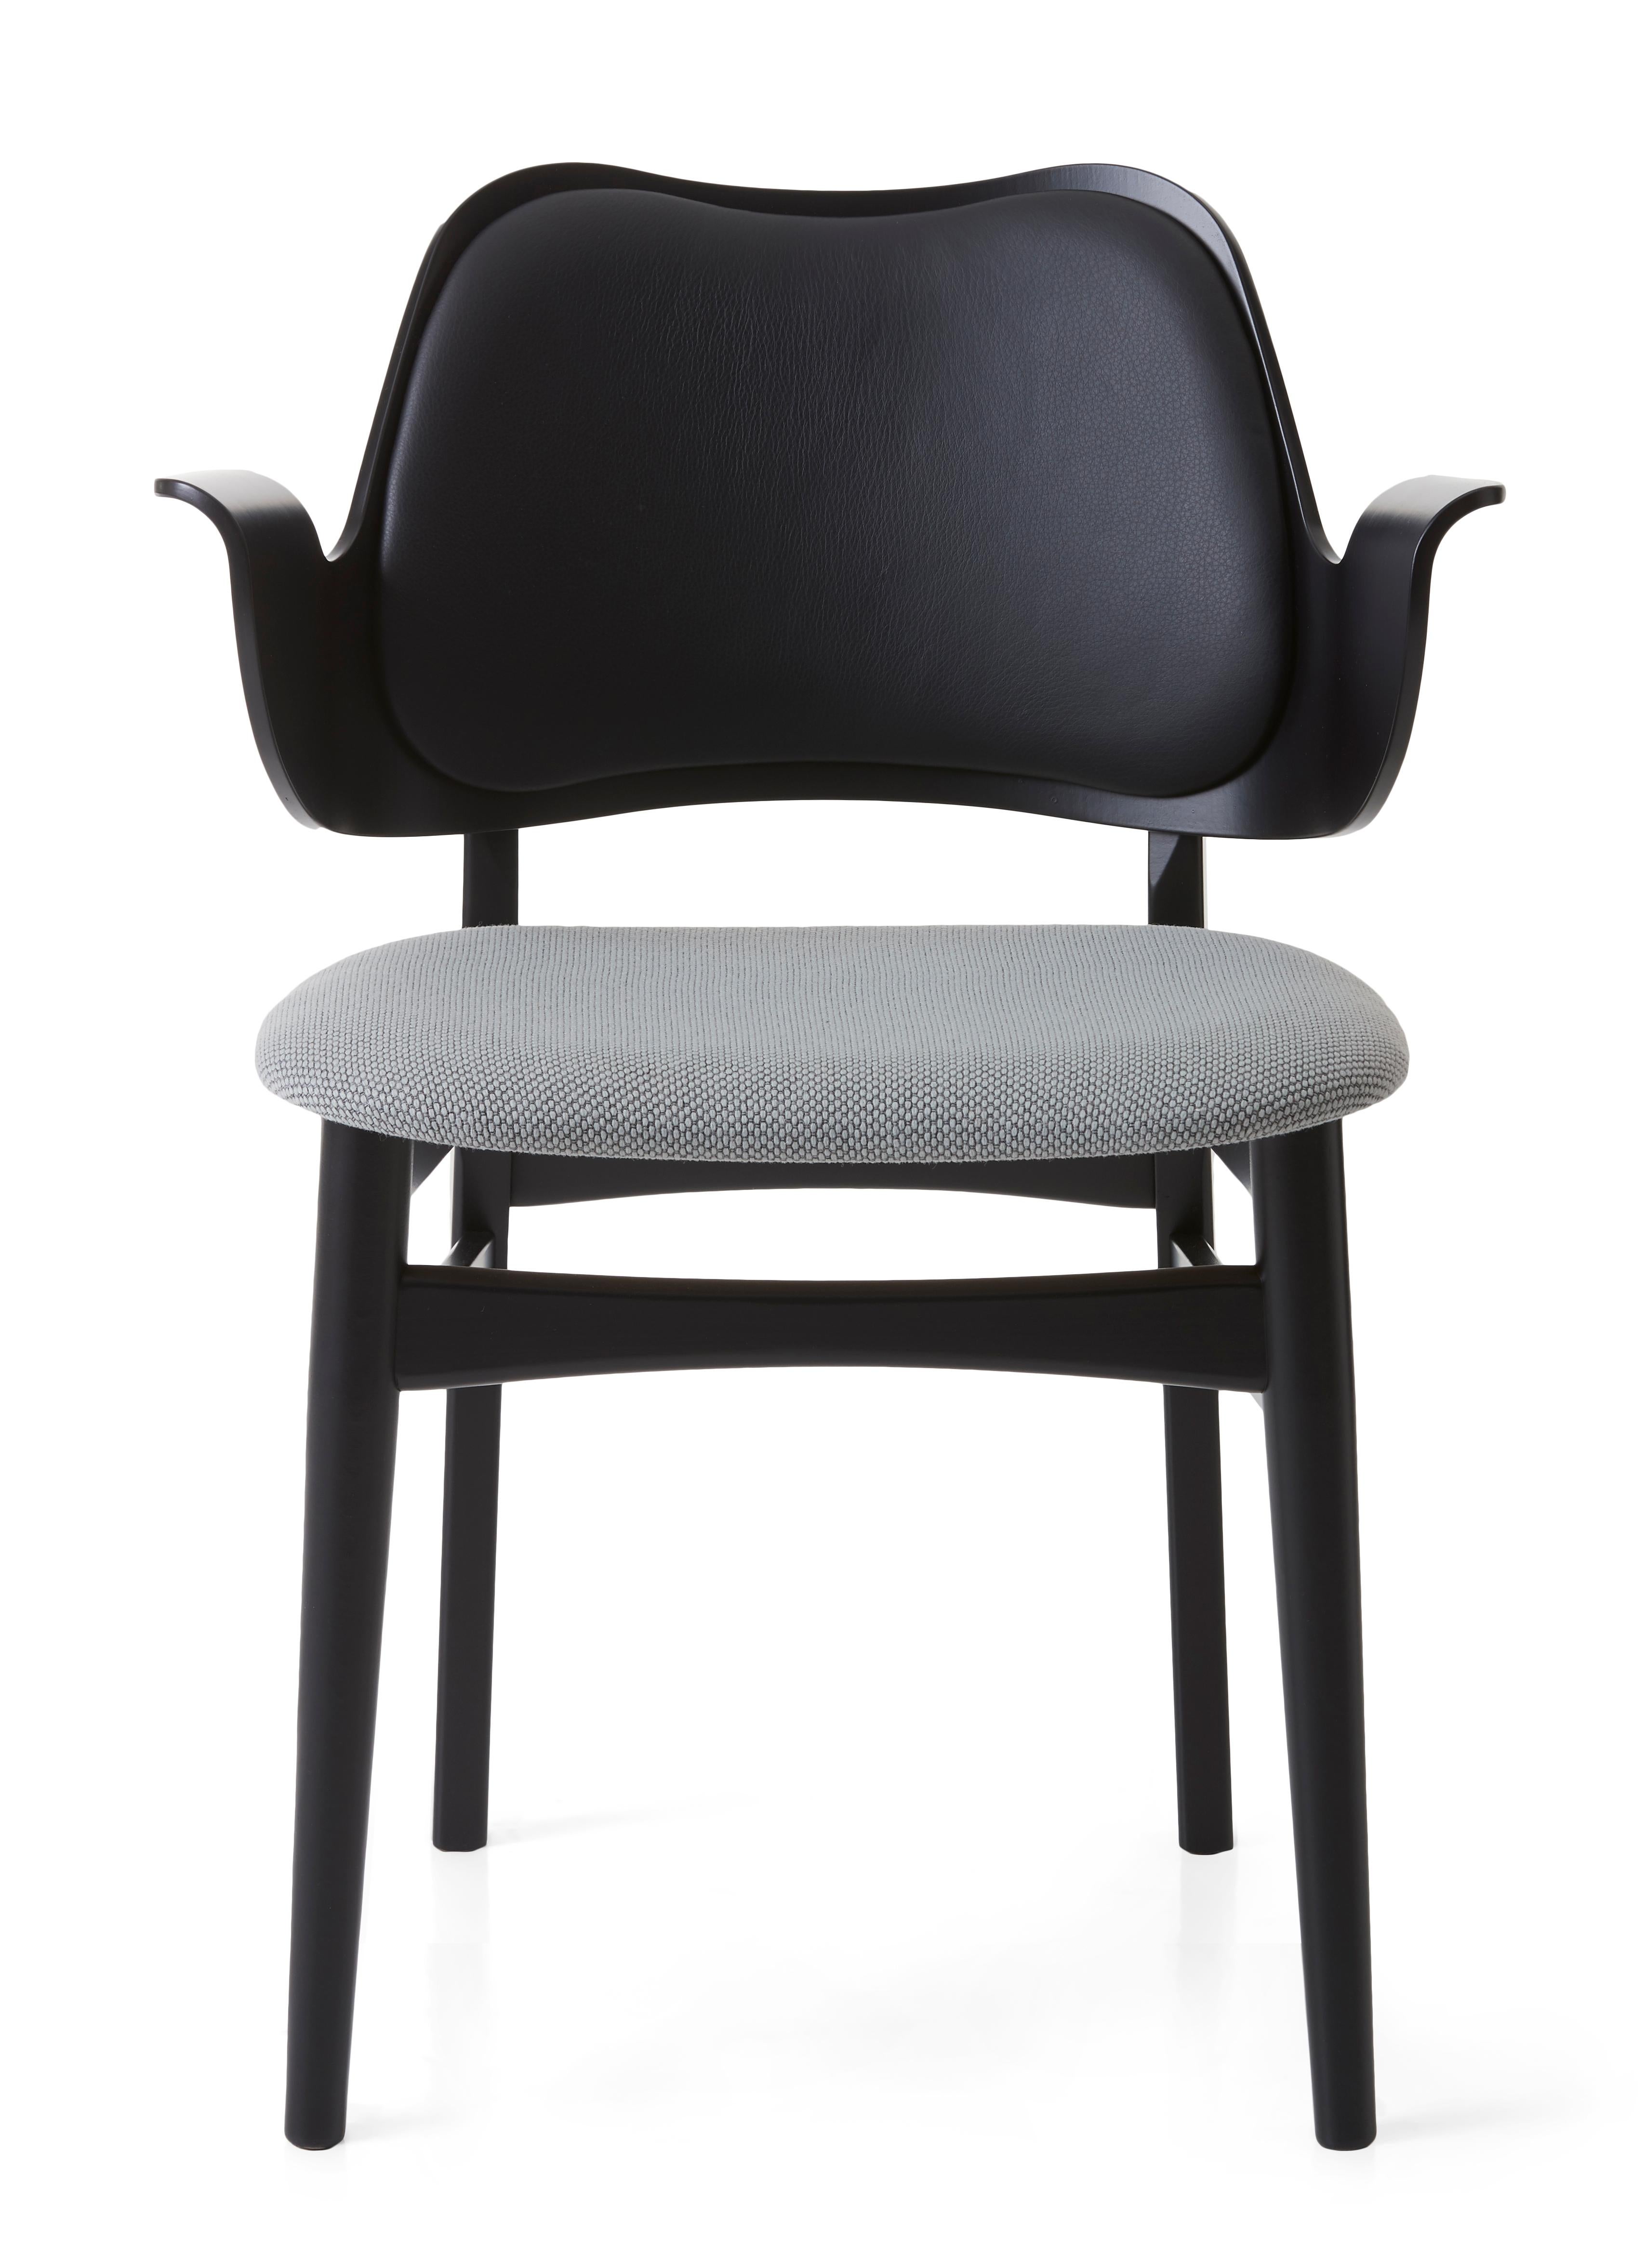 For Sale: Gray (Pres207,Merit016) Gesture Two-Tone Fully Upholstered Chair in Black, by Hans Olsen for Warm Nordic